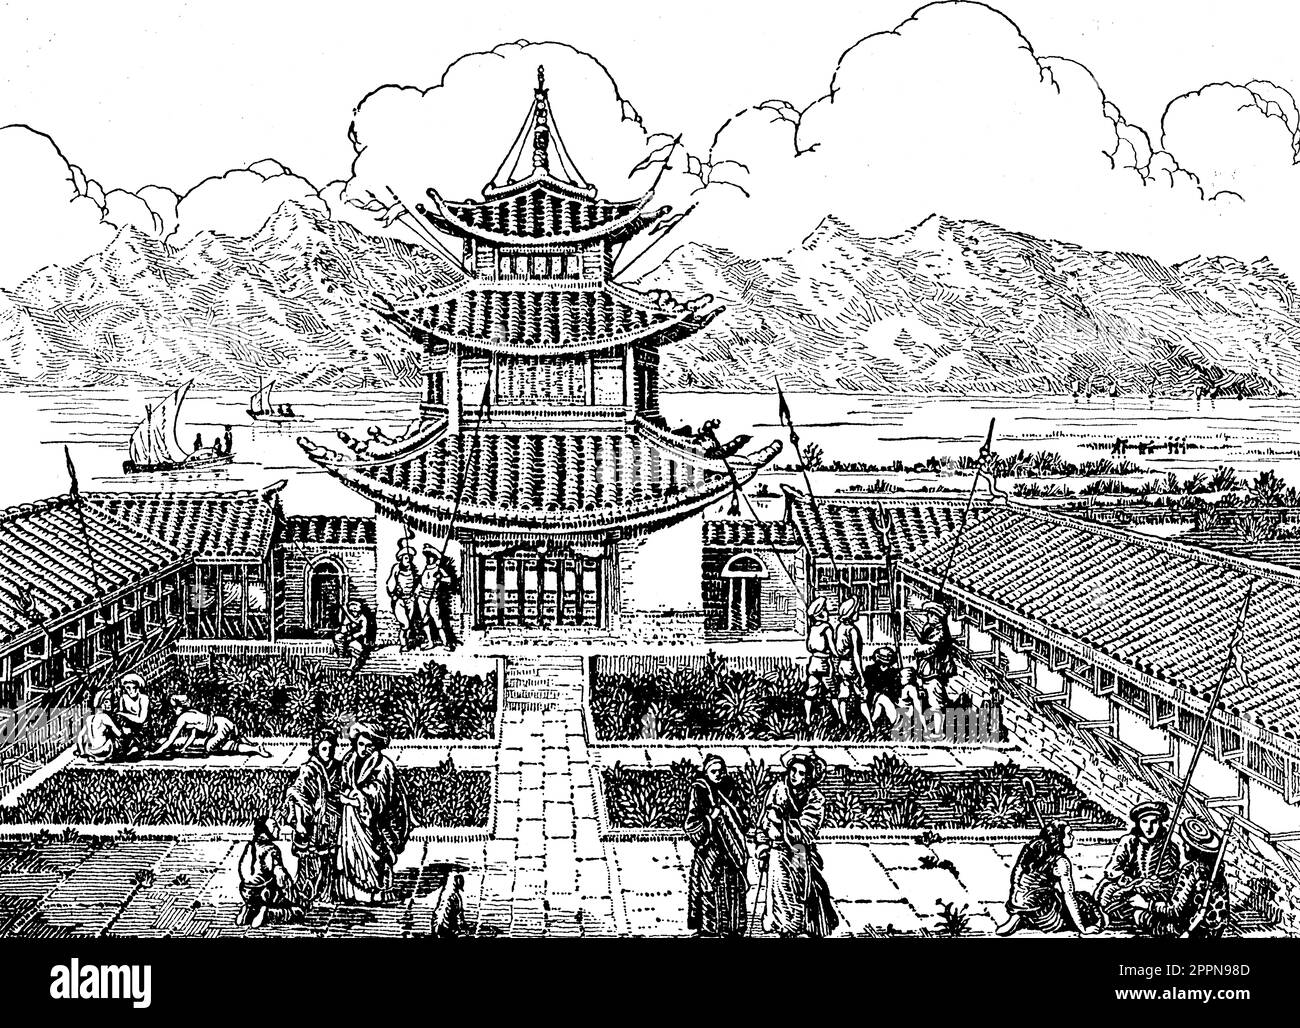 The garden house of Marco Polo on the lake at Yunnan-Fu, Yachi, China. From 'The Book of Ser Marco Polo, the Venetian : concerning the kingdoms and marvels of the East', 1871. Translated by Colonel Sir Henry Yule (1820-1889). Stock Photo